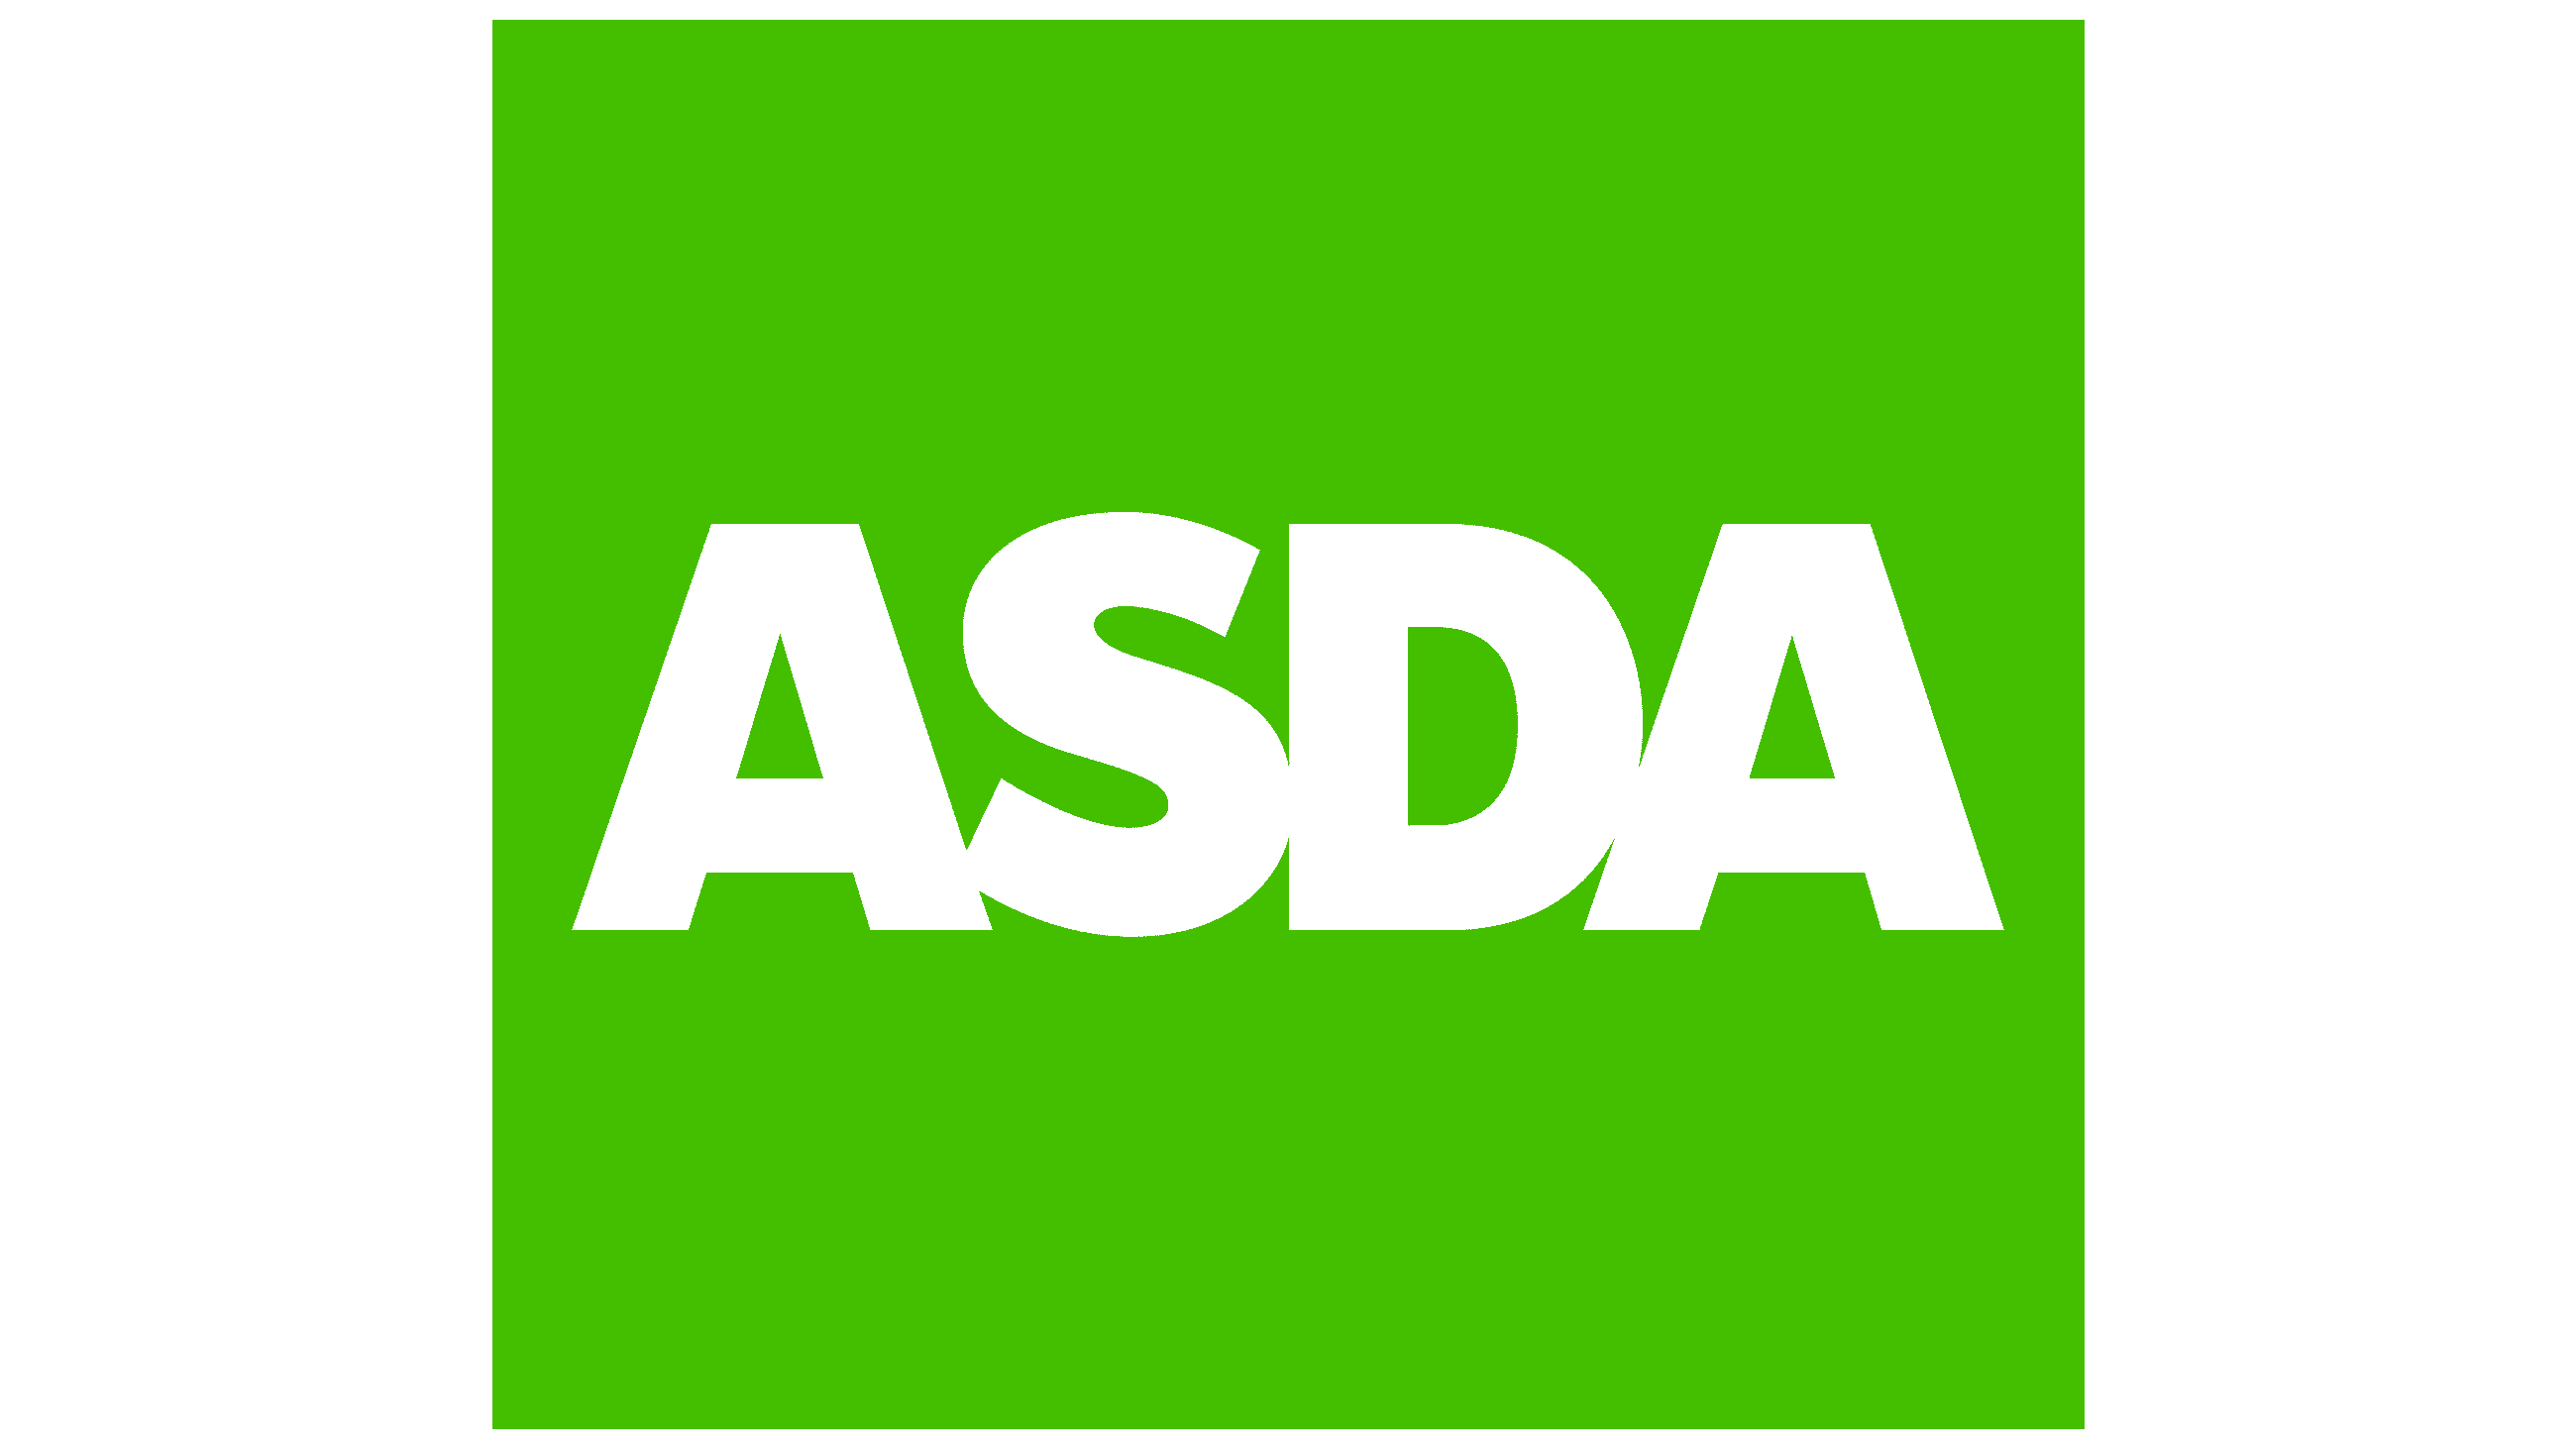 Account Takeover Via Poising Forget Password Port in ASDA